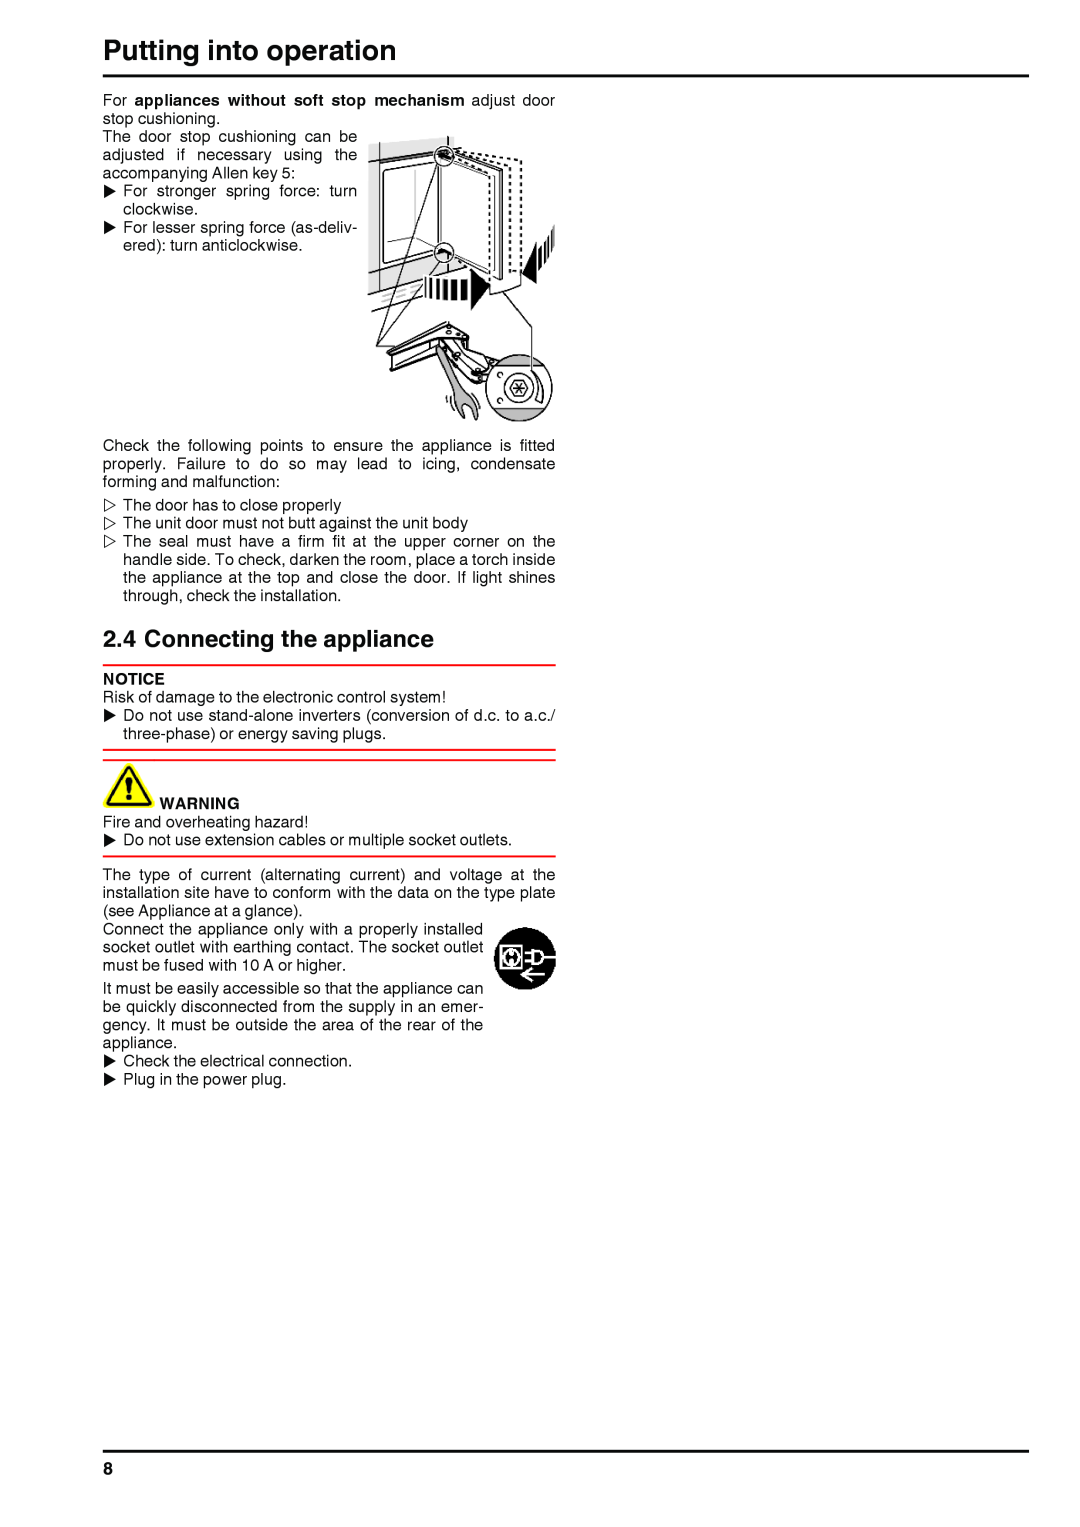 Liebherr 211111 7085270 - 00 installation instructions Connecting the appliance, Putting into operation 